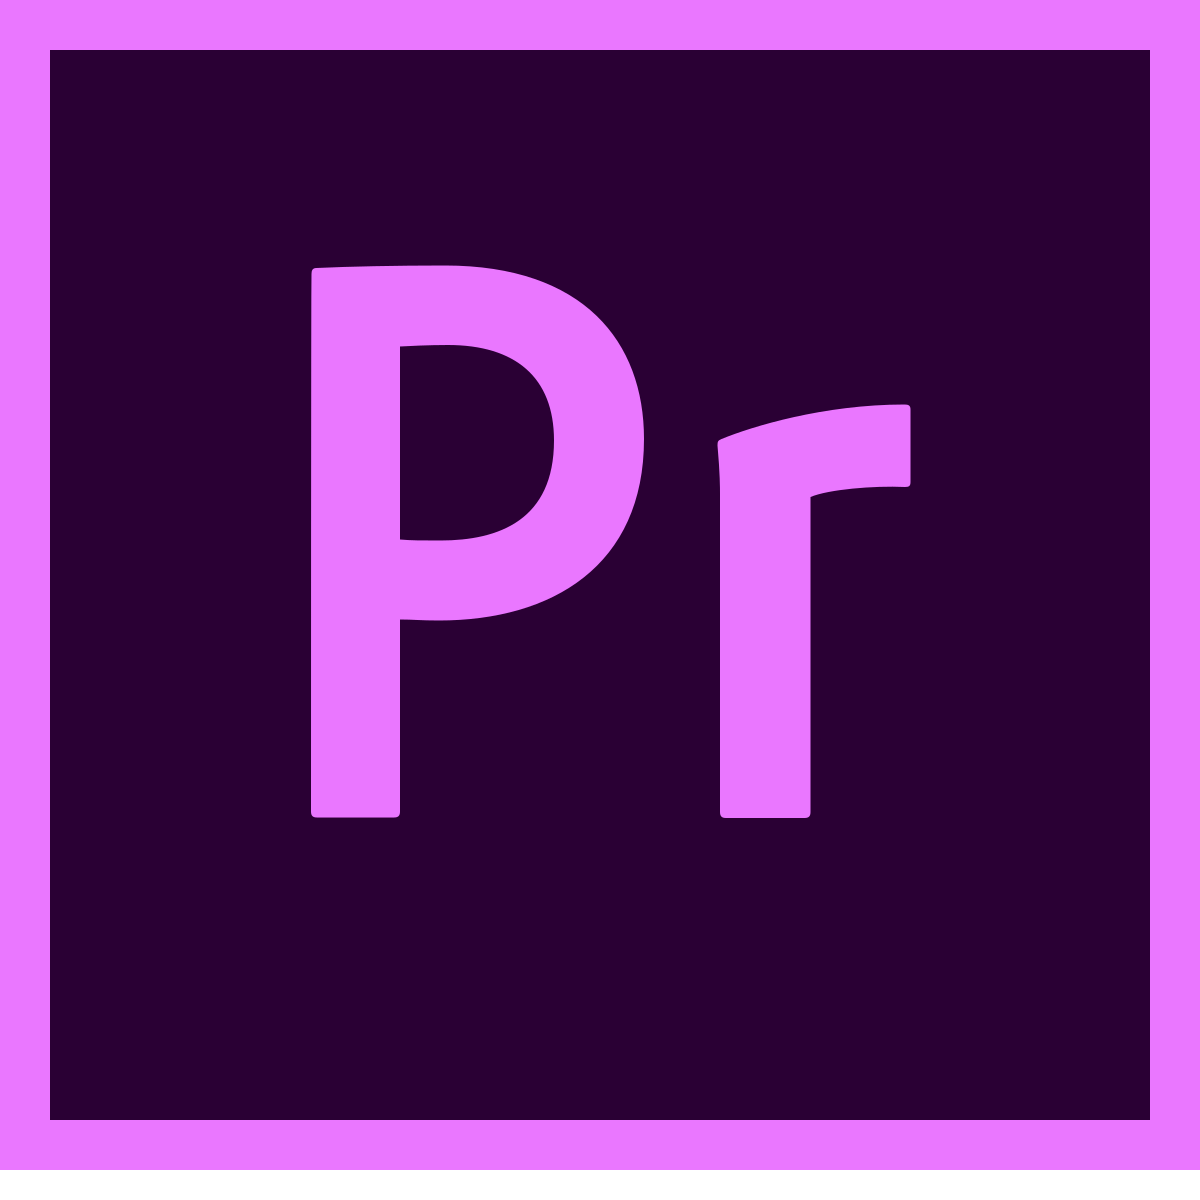 Adobe premiere 12 Highly Compressed Size Download - TECH SOLUTIONS WEB